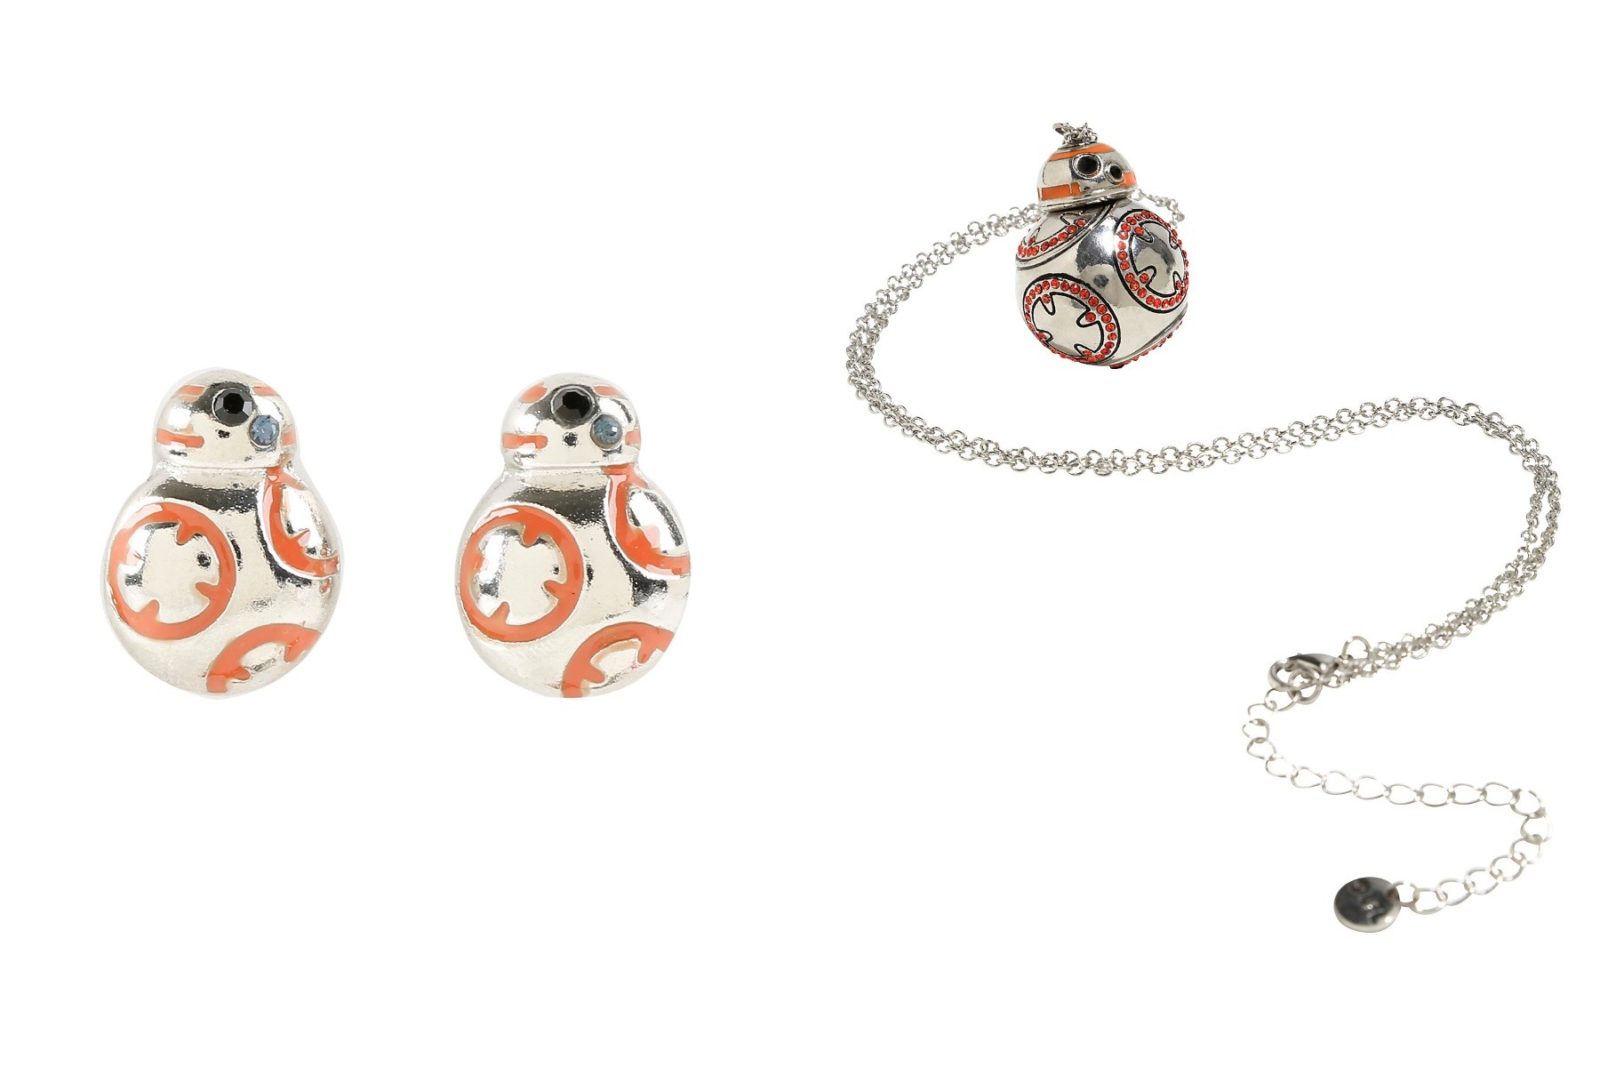 New BB-8 jewelry at Hot Topic